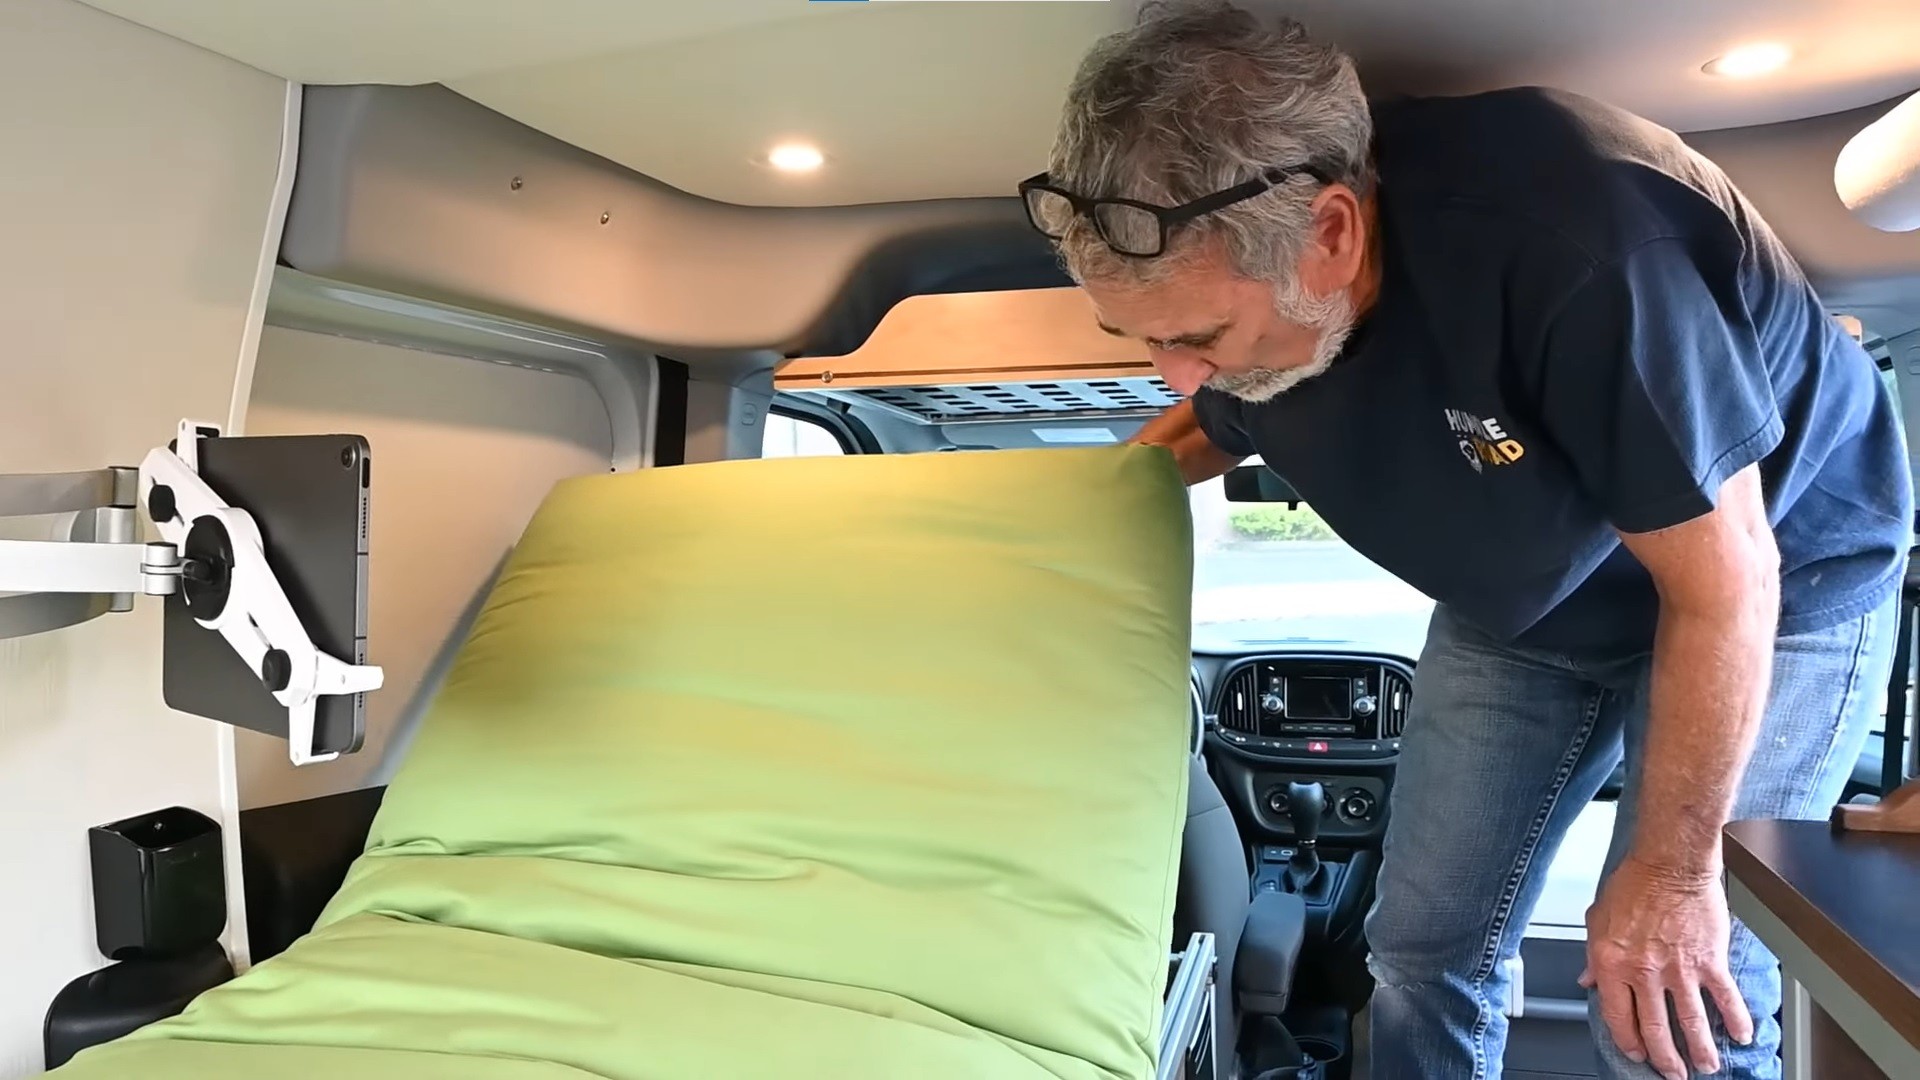 https://s1.cdn.autoevolution.com/images/news/gallery/stealthy-mini-me-micro-camper-hides-a-creative-interior-filled-with-practical-gadgets_2.jpg